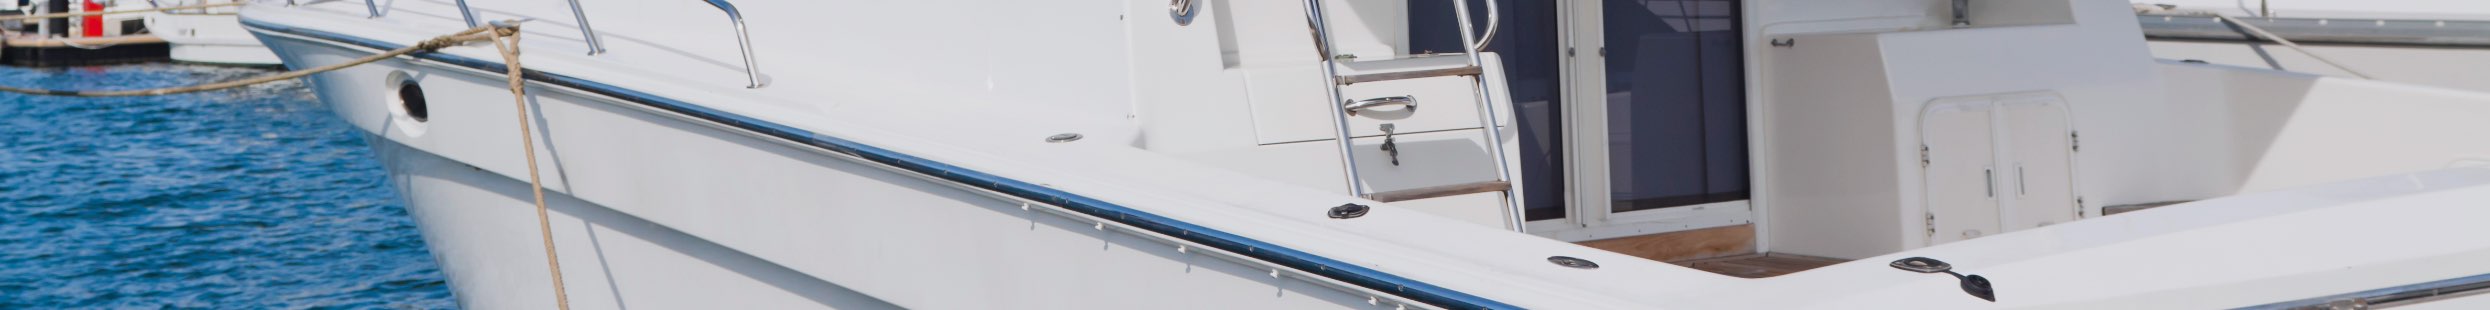 Boat Ladder Buying Guide: Tips for Choosing the Right Boarding Ladder